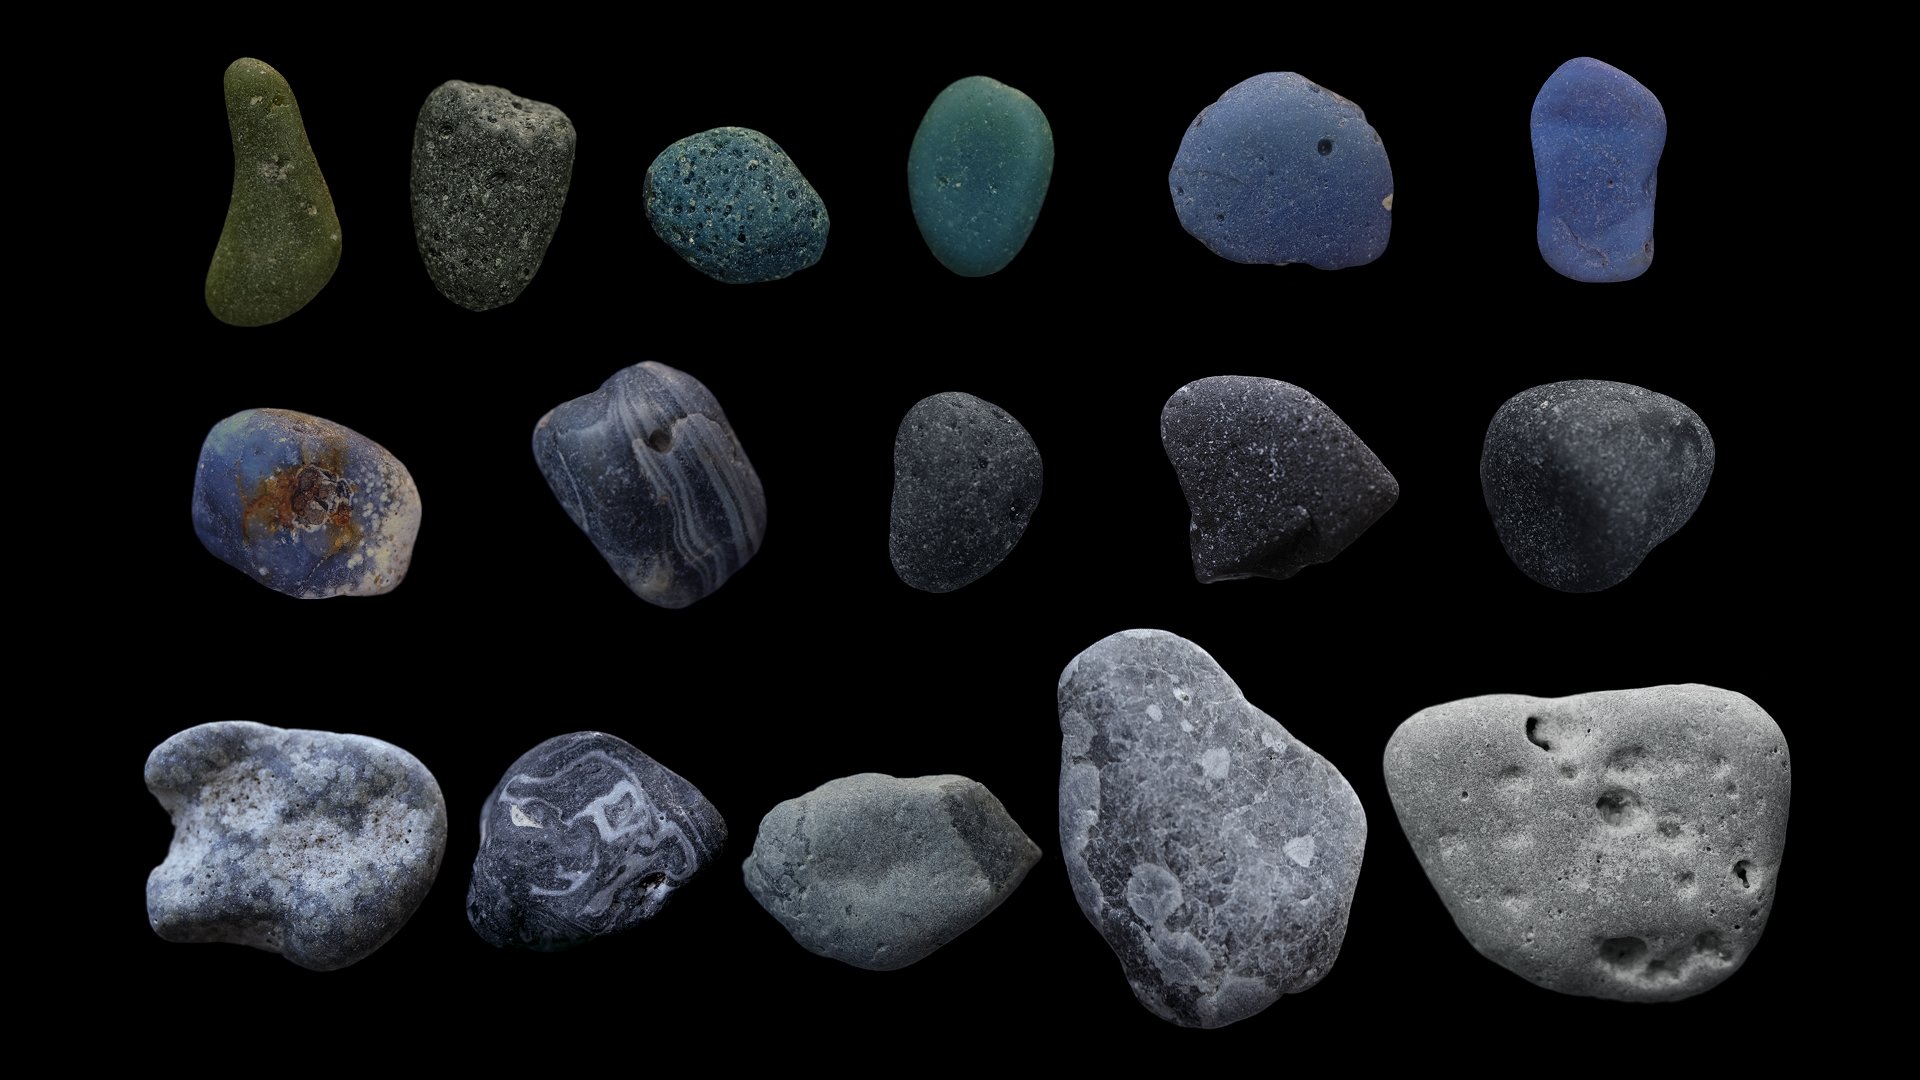 A collection of Leland Blues under visible light, Photo Credit: Cody Wiedenbein